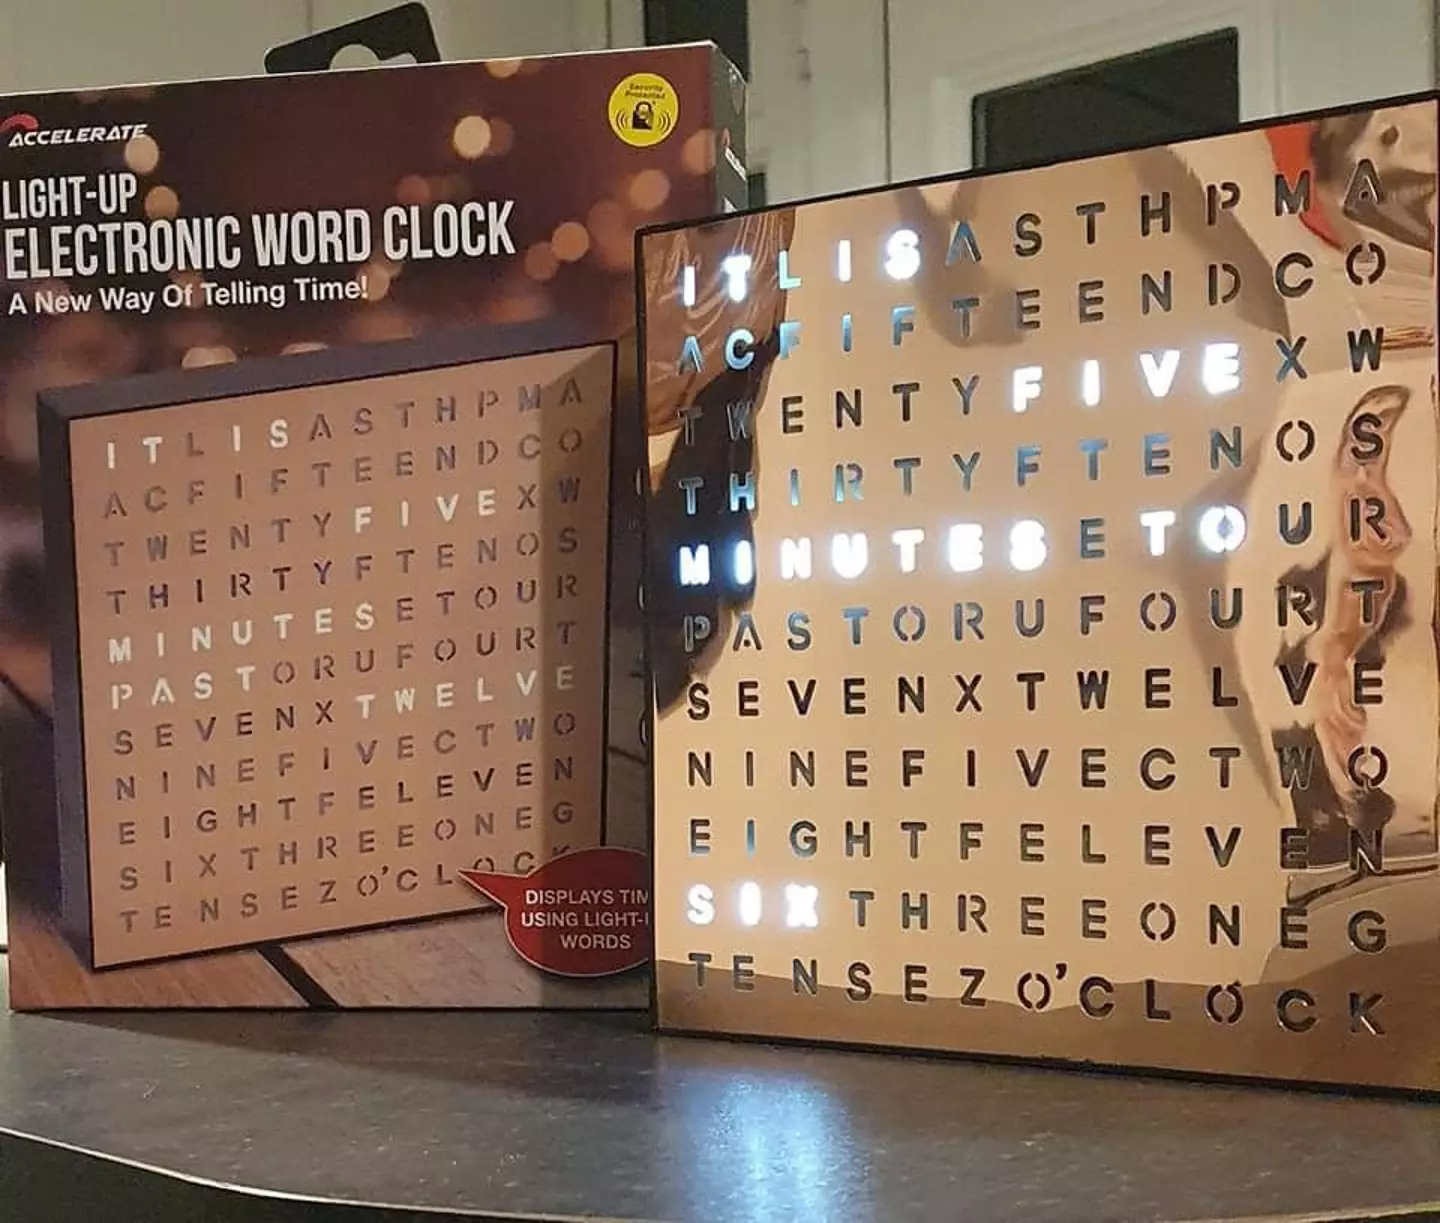 People are loving the word clock (